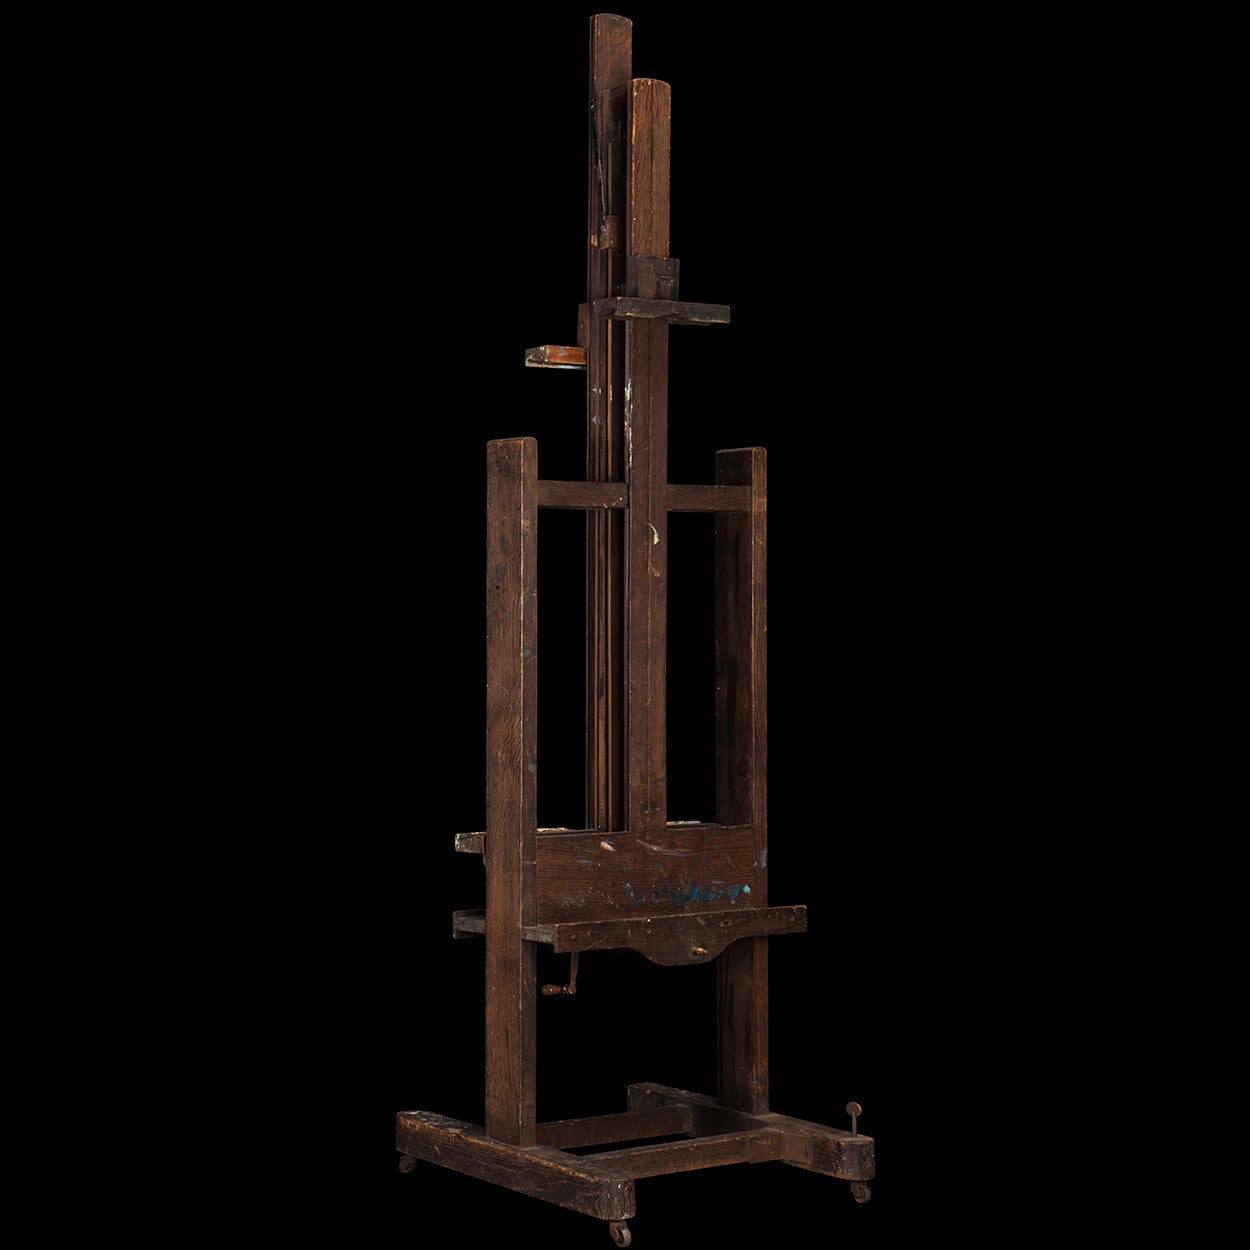 Rare easel with the capacity to showcase art on two faces.

Made in England circa 1850.